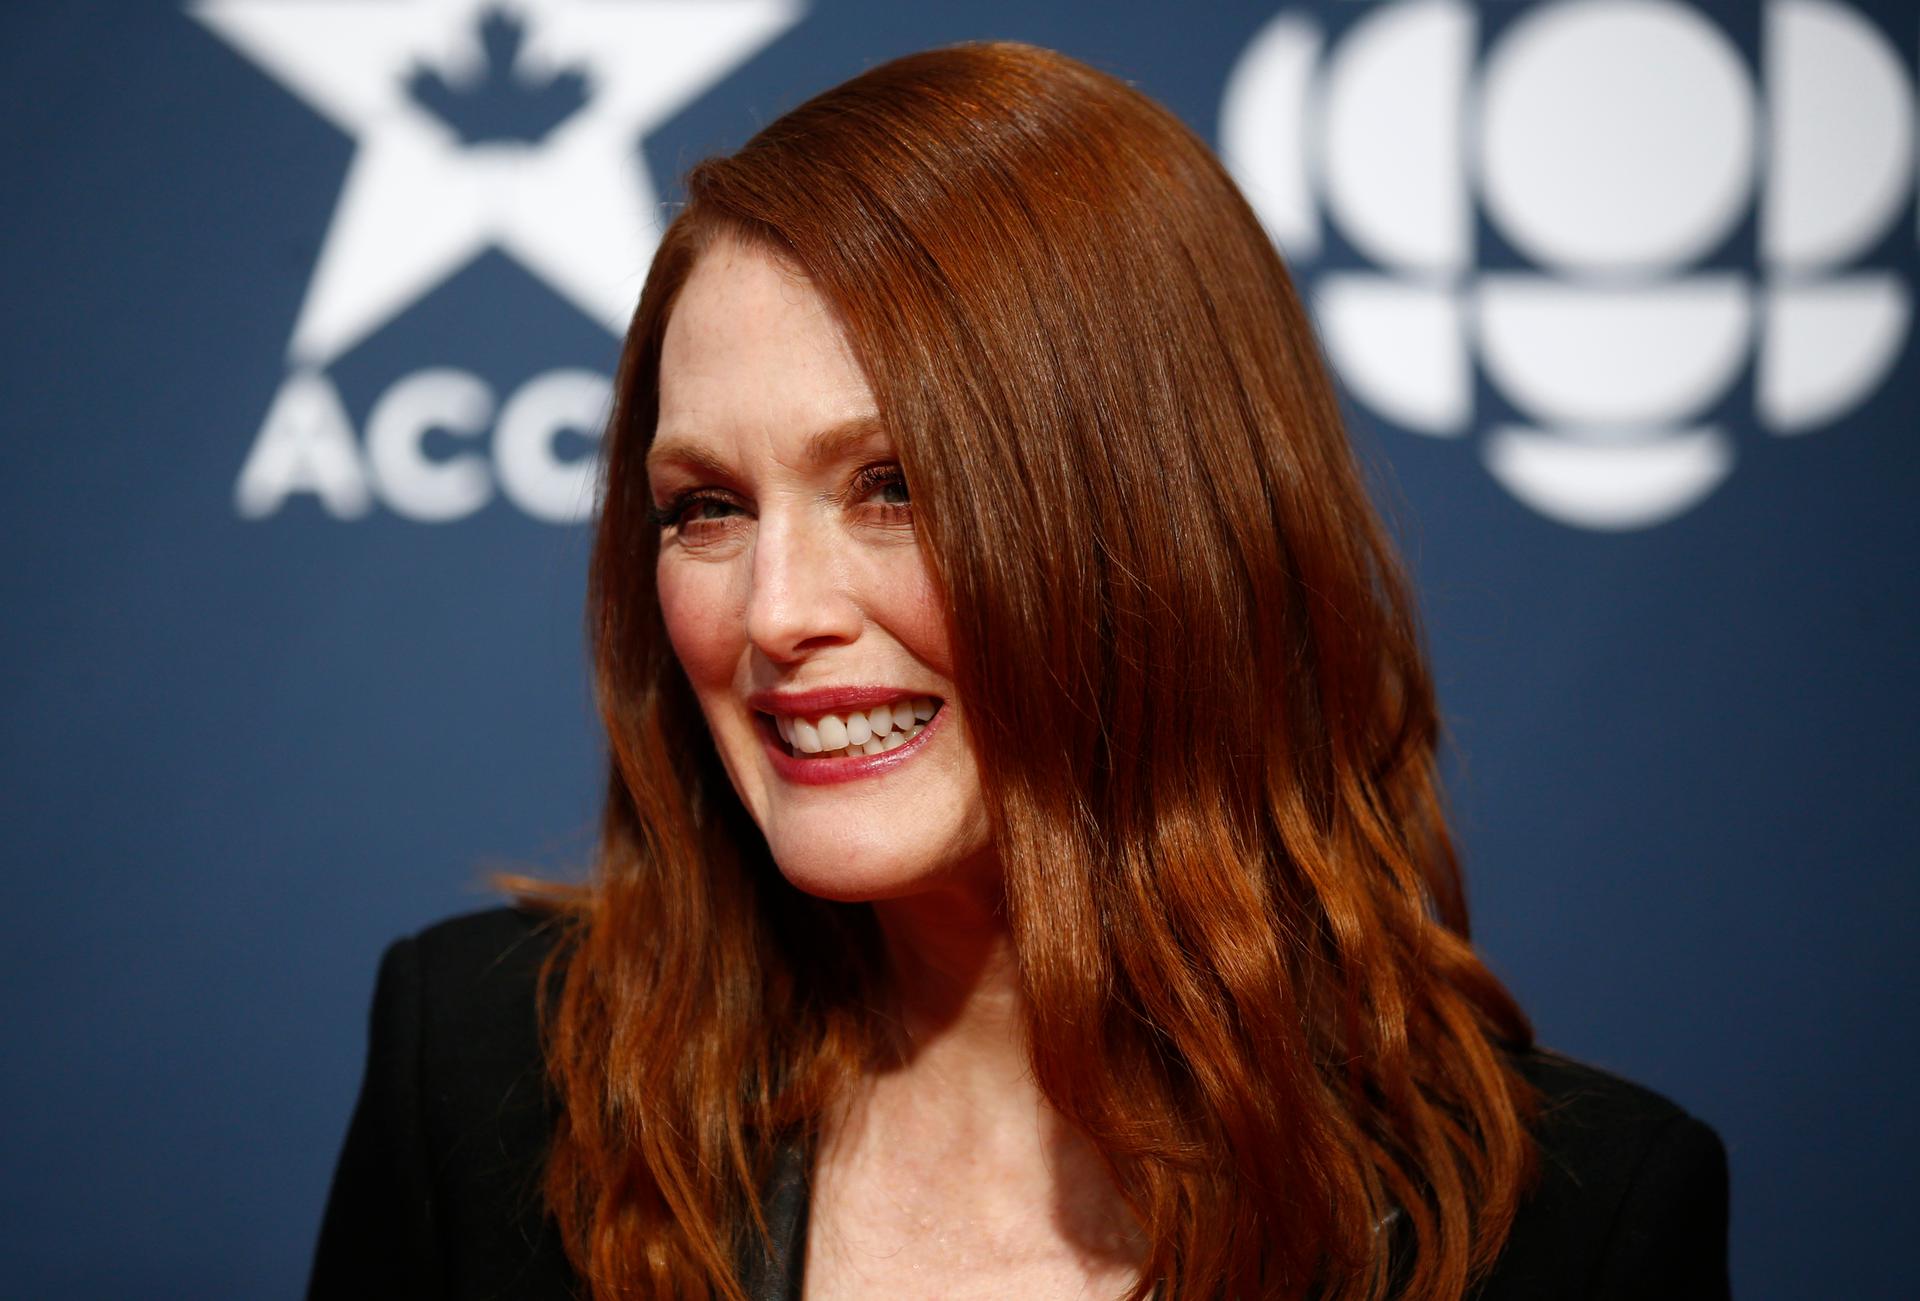 Actress Julianne Moore arrives at the 2015 Canadian Screen Awards in Toronto on March 1, 2015. Her portrayal of Alzheimer's in the film "Still Alice" helped spotlight the effects of the disease on women.